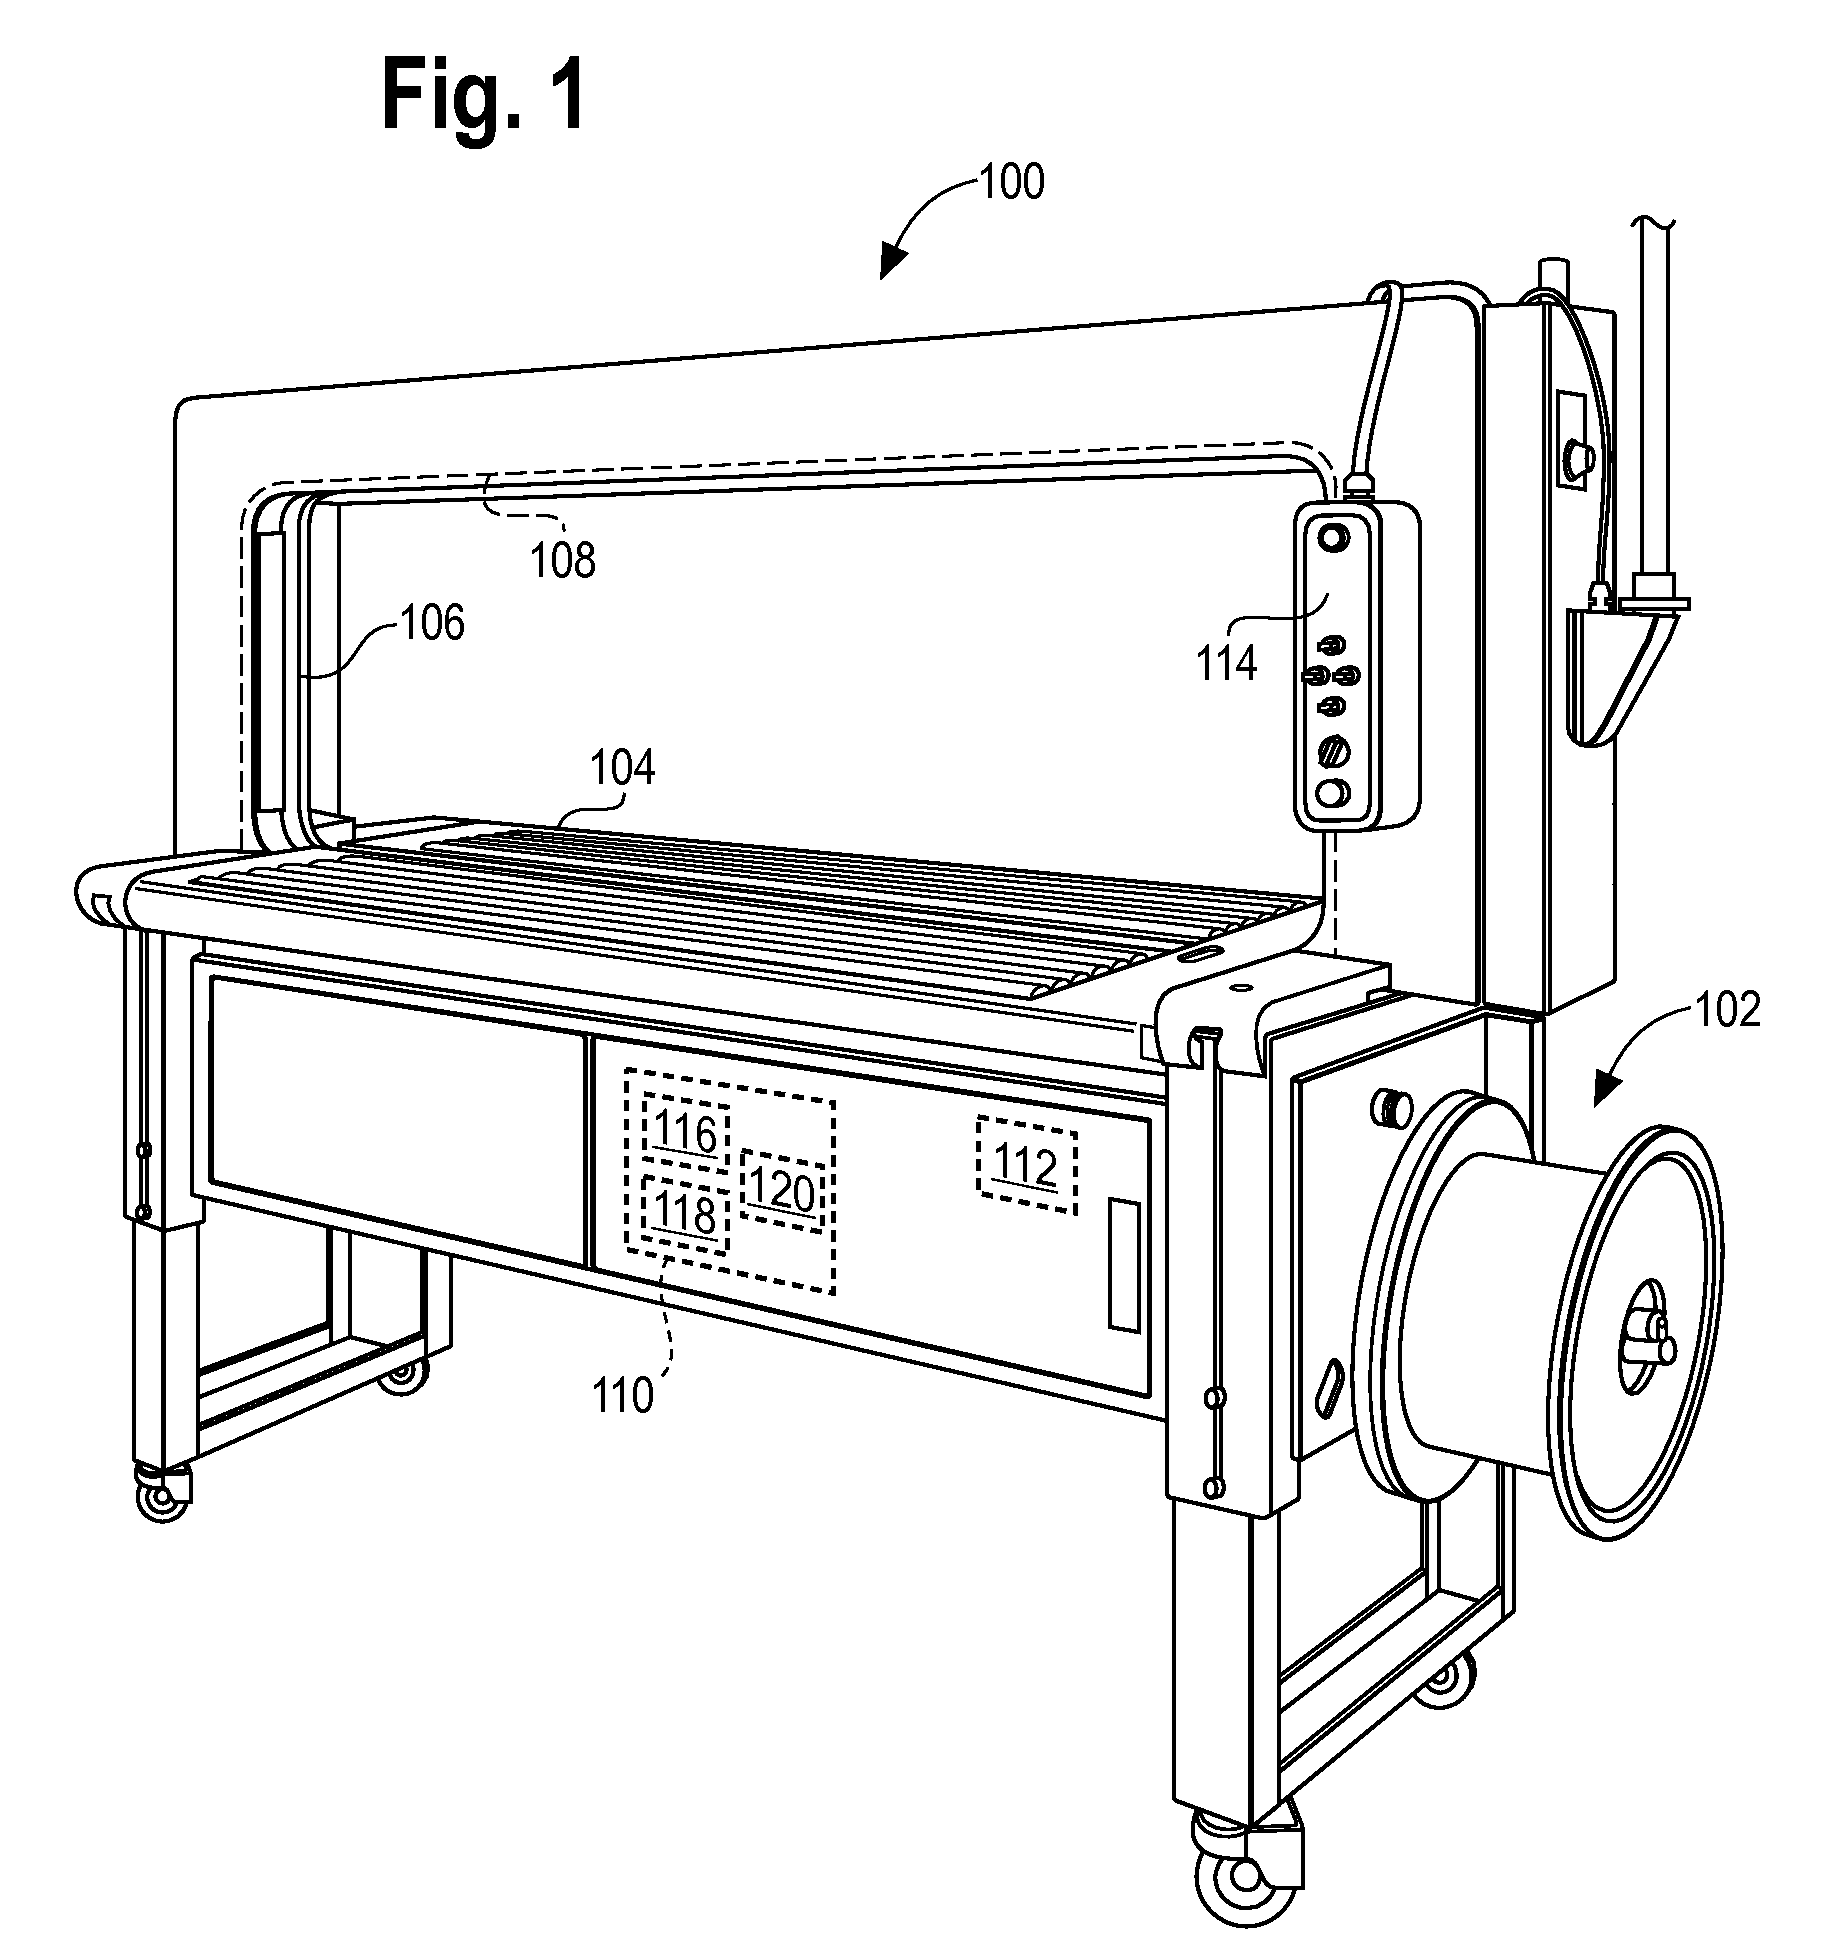 Tension control system and method for tensioning a strapping material around a load in a strapping machine